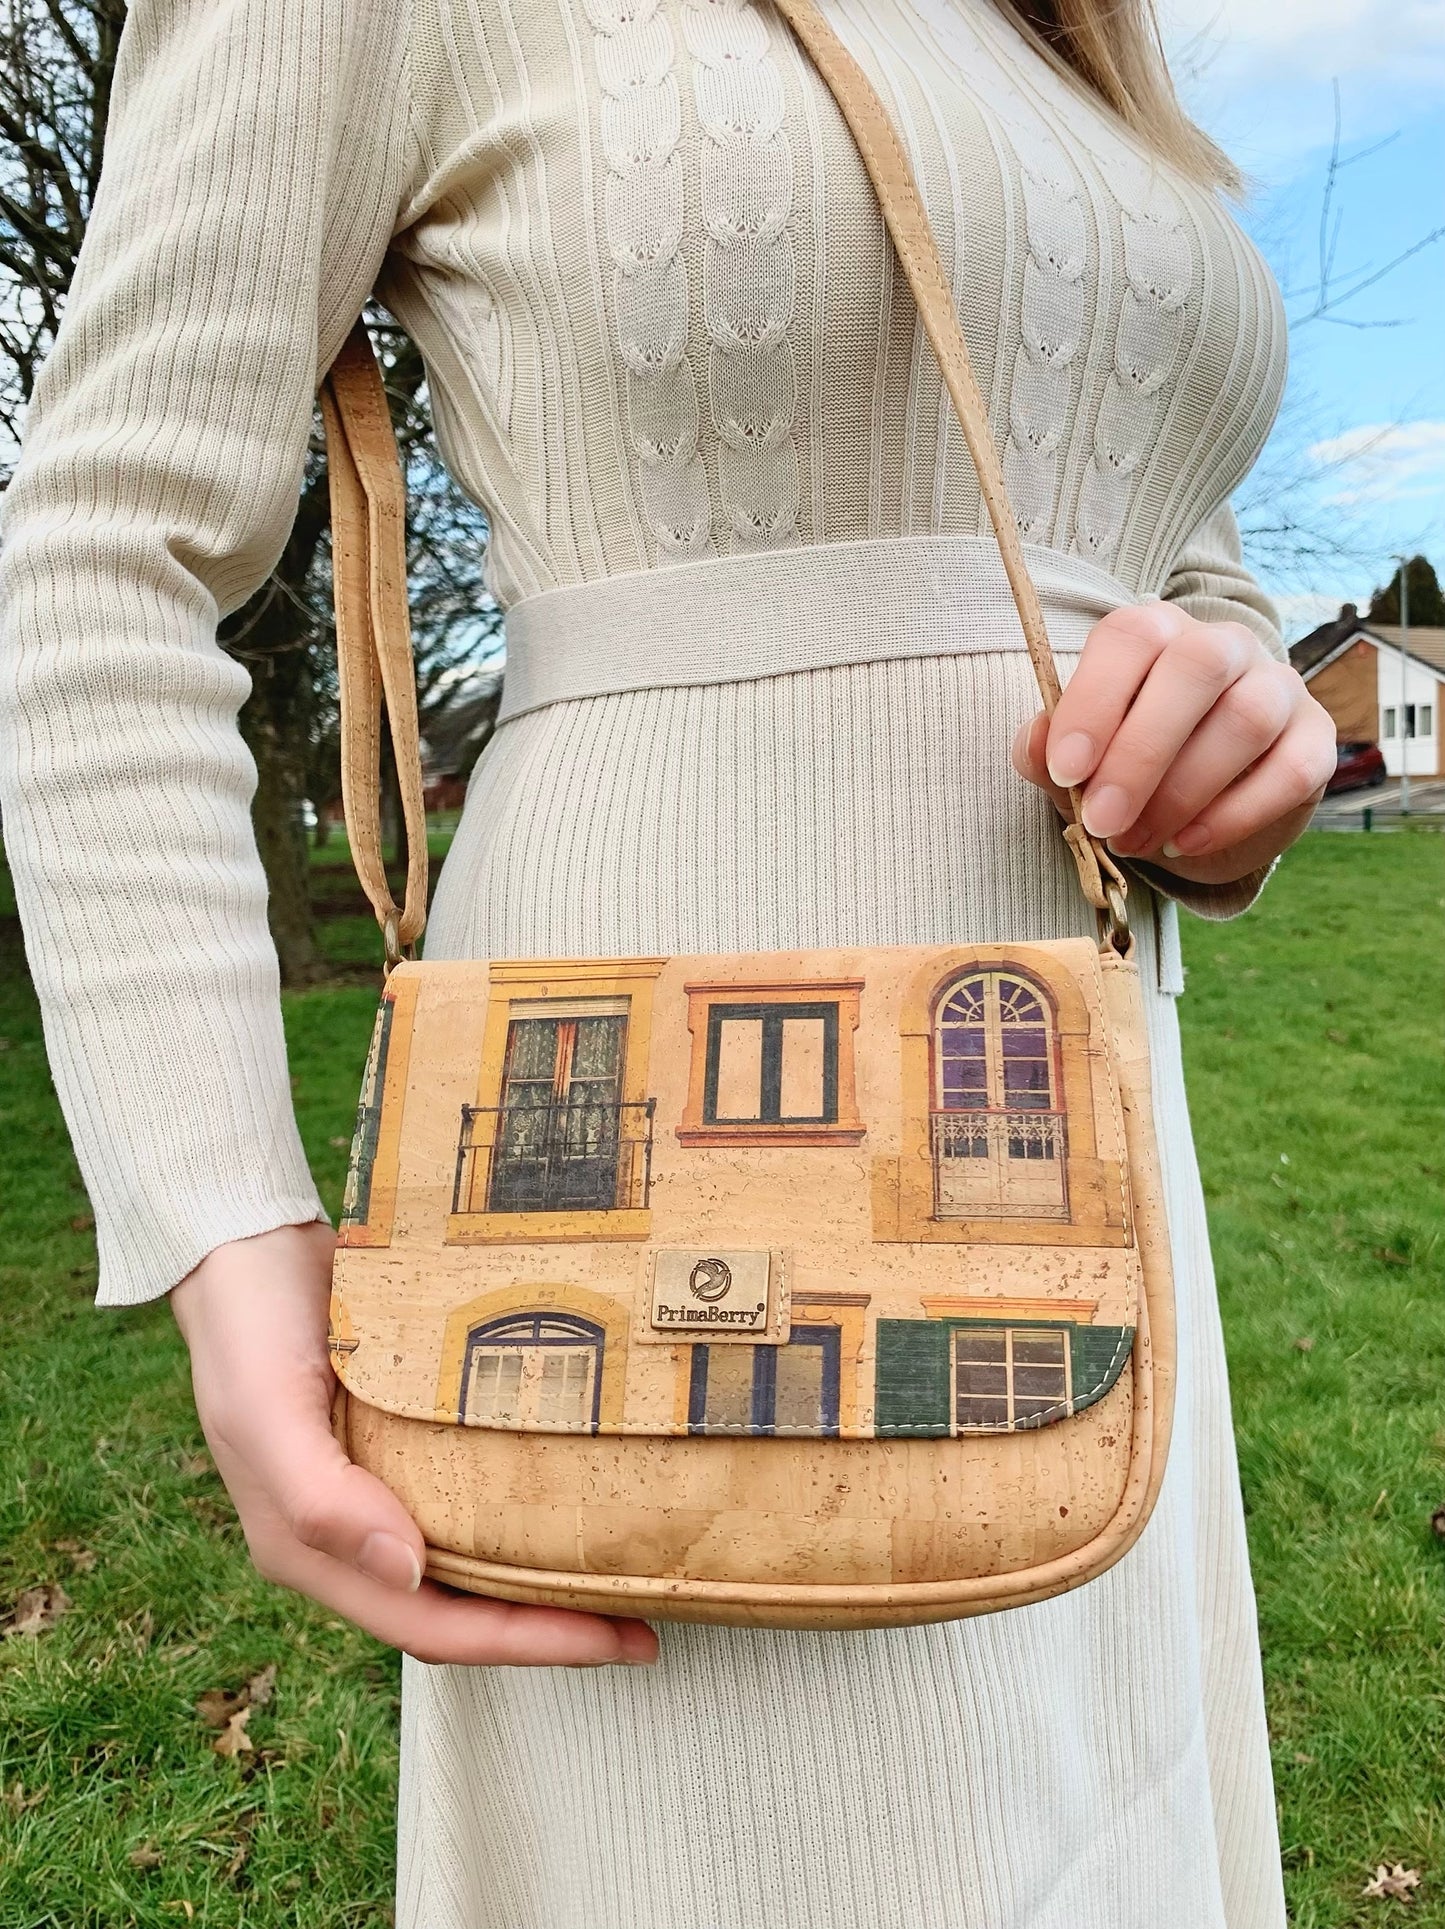 Portuguese Window Collection Cork Crossbody Bag Flap: Stylish, Sustainable, and Ethical Crossbody Inspired by Traditional Portuguese Windows